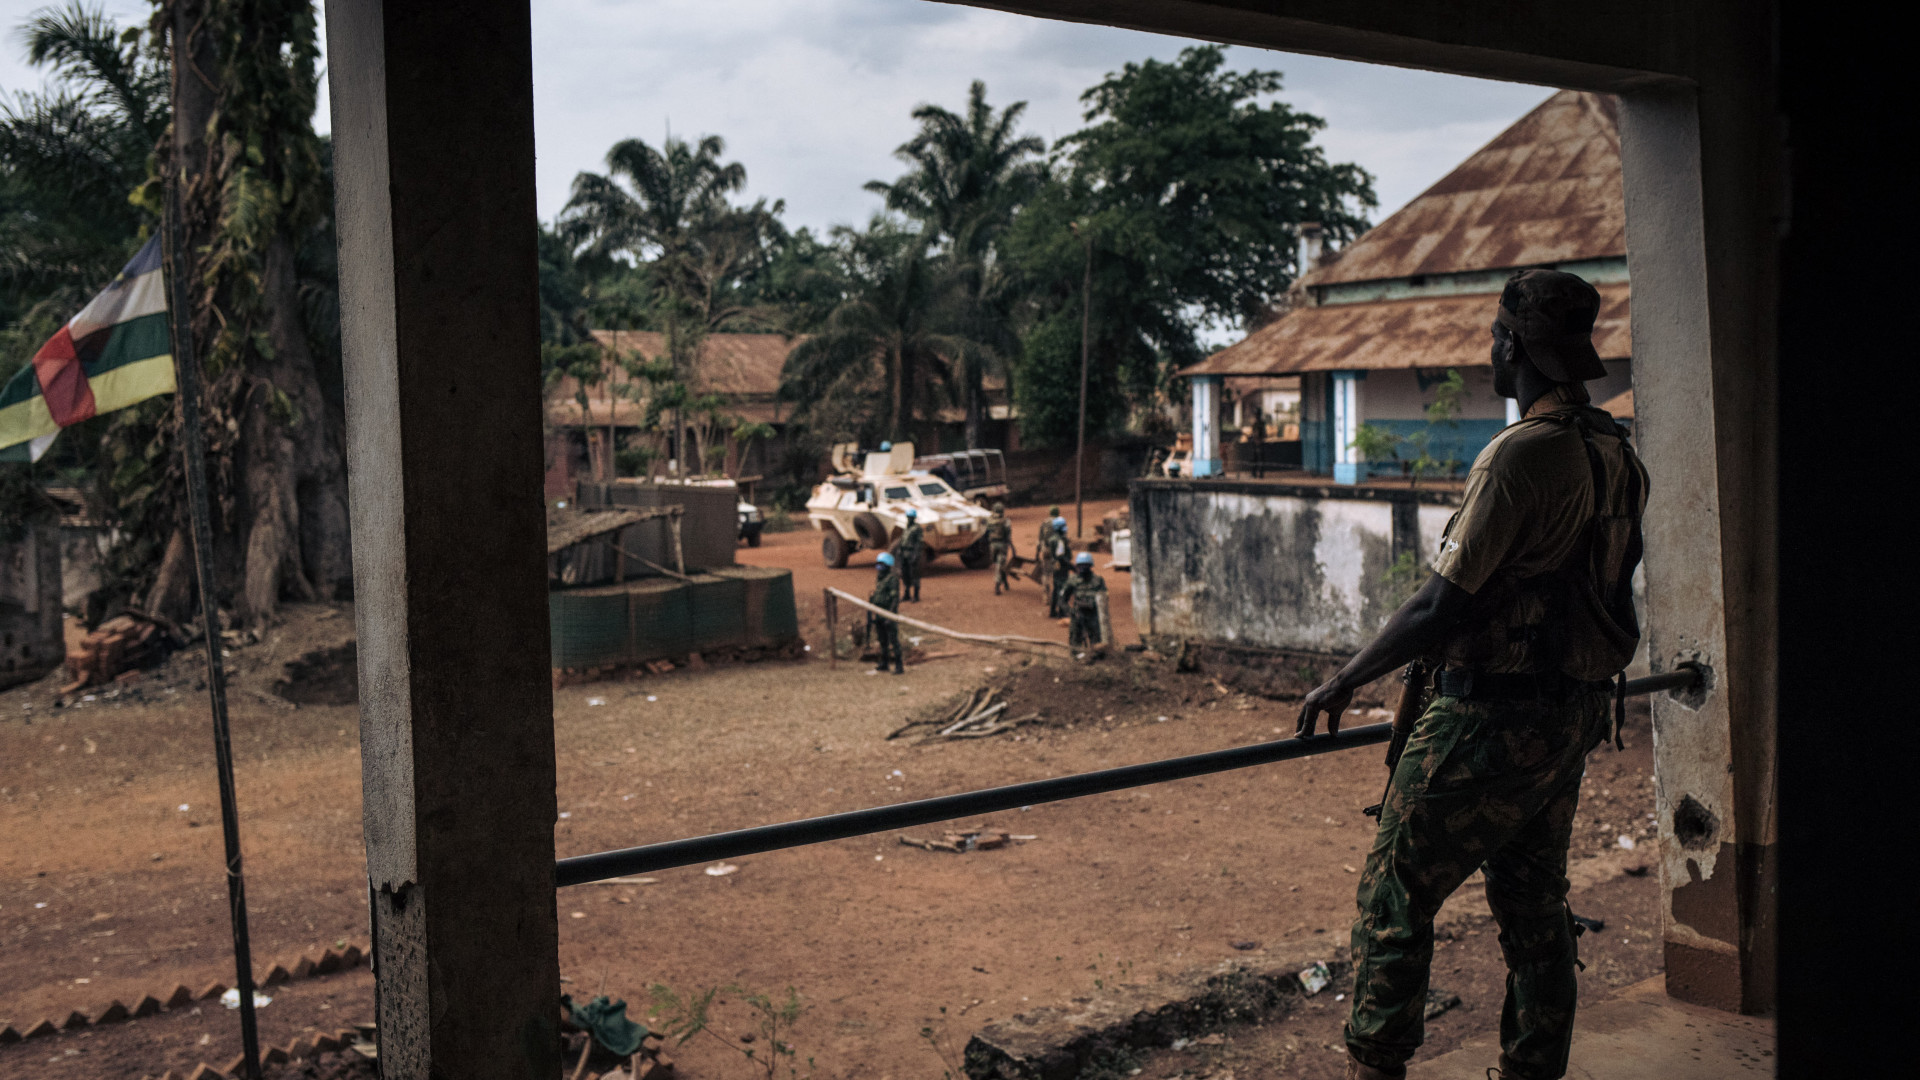 Central African Army soldiers inspect their looted military base that was occupied by rebel militiamen in Bangassou on 3 February 2021, for the first time since a 3 January 2021 attack. (AFP)